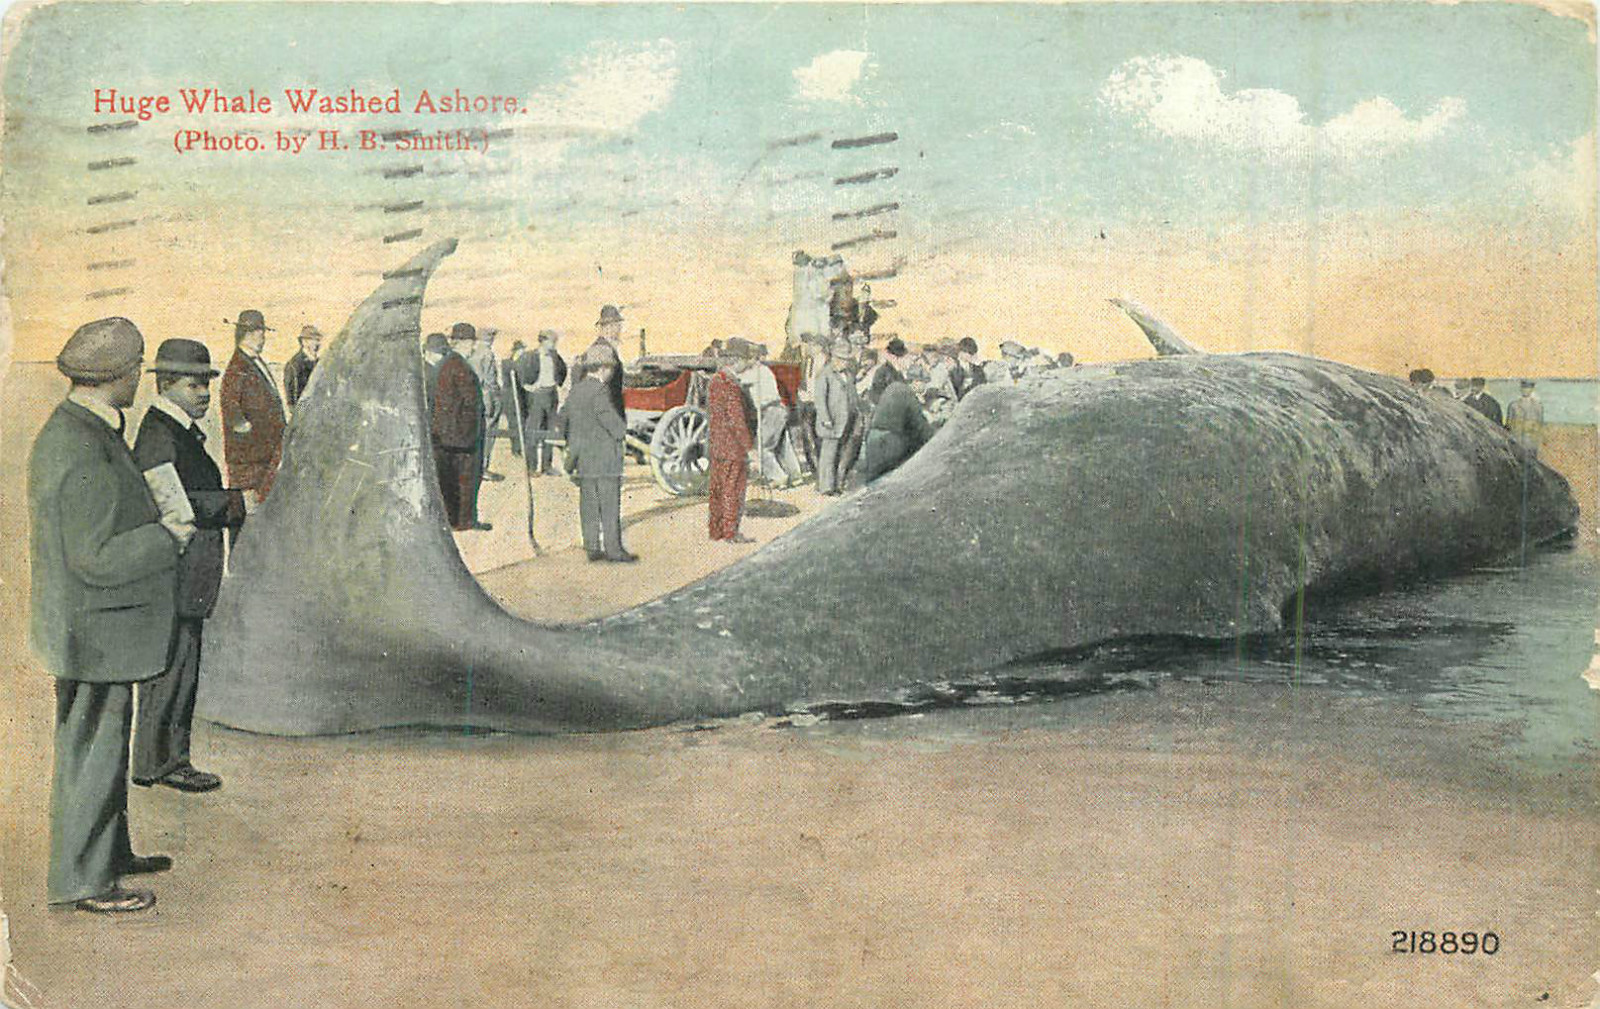 Atlantic City - Dead whale washed up on the beach - 1916